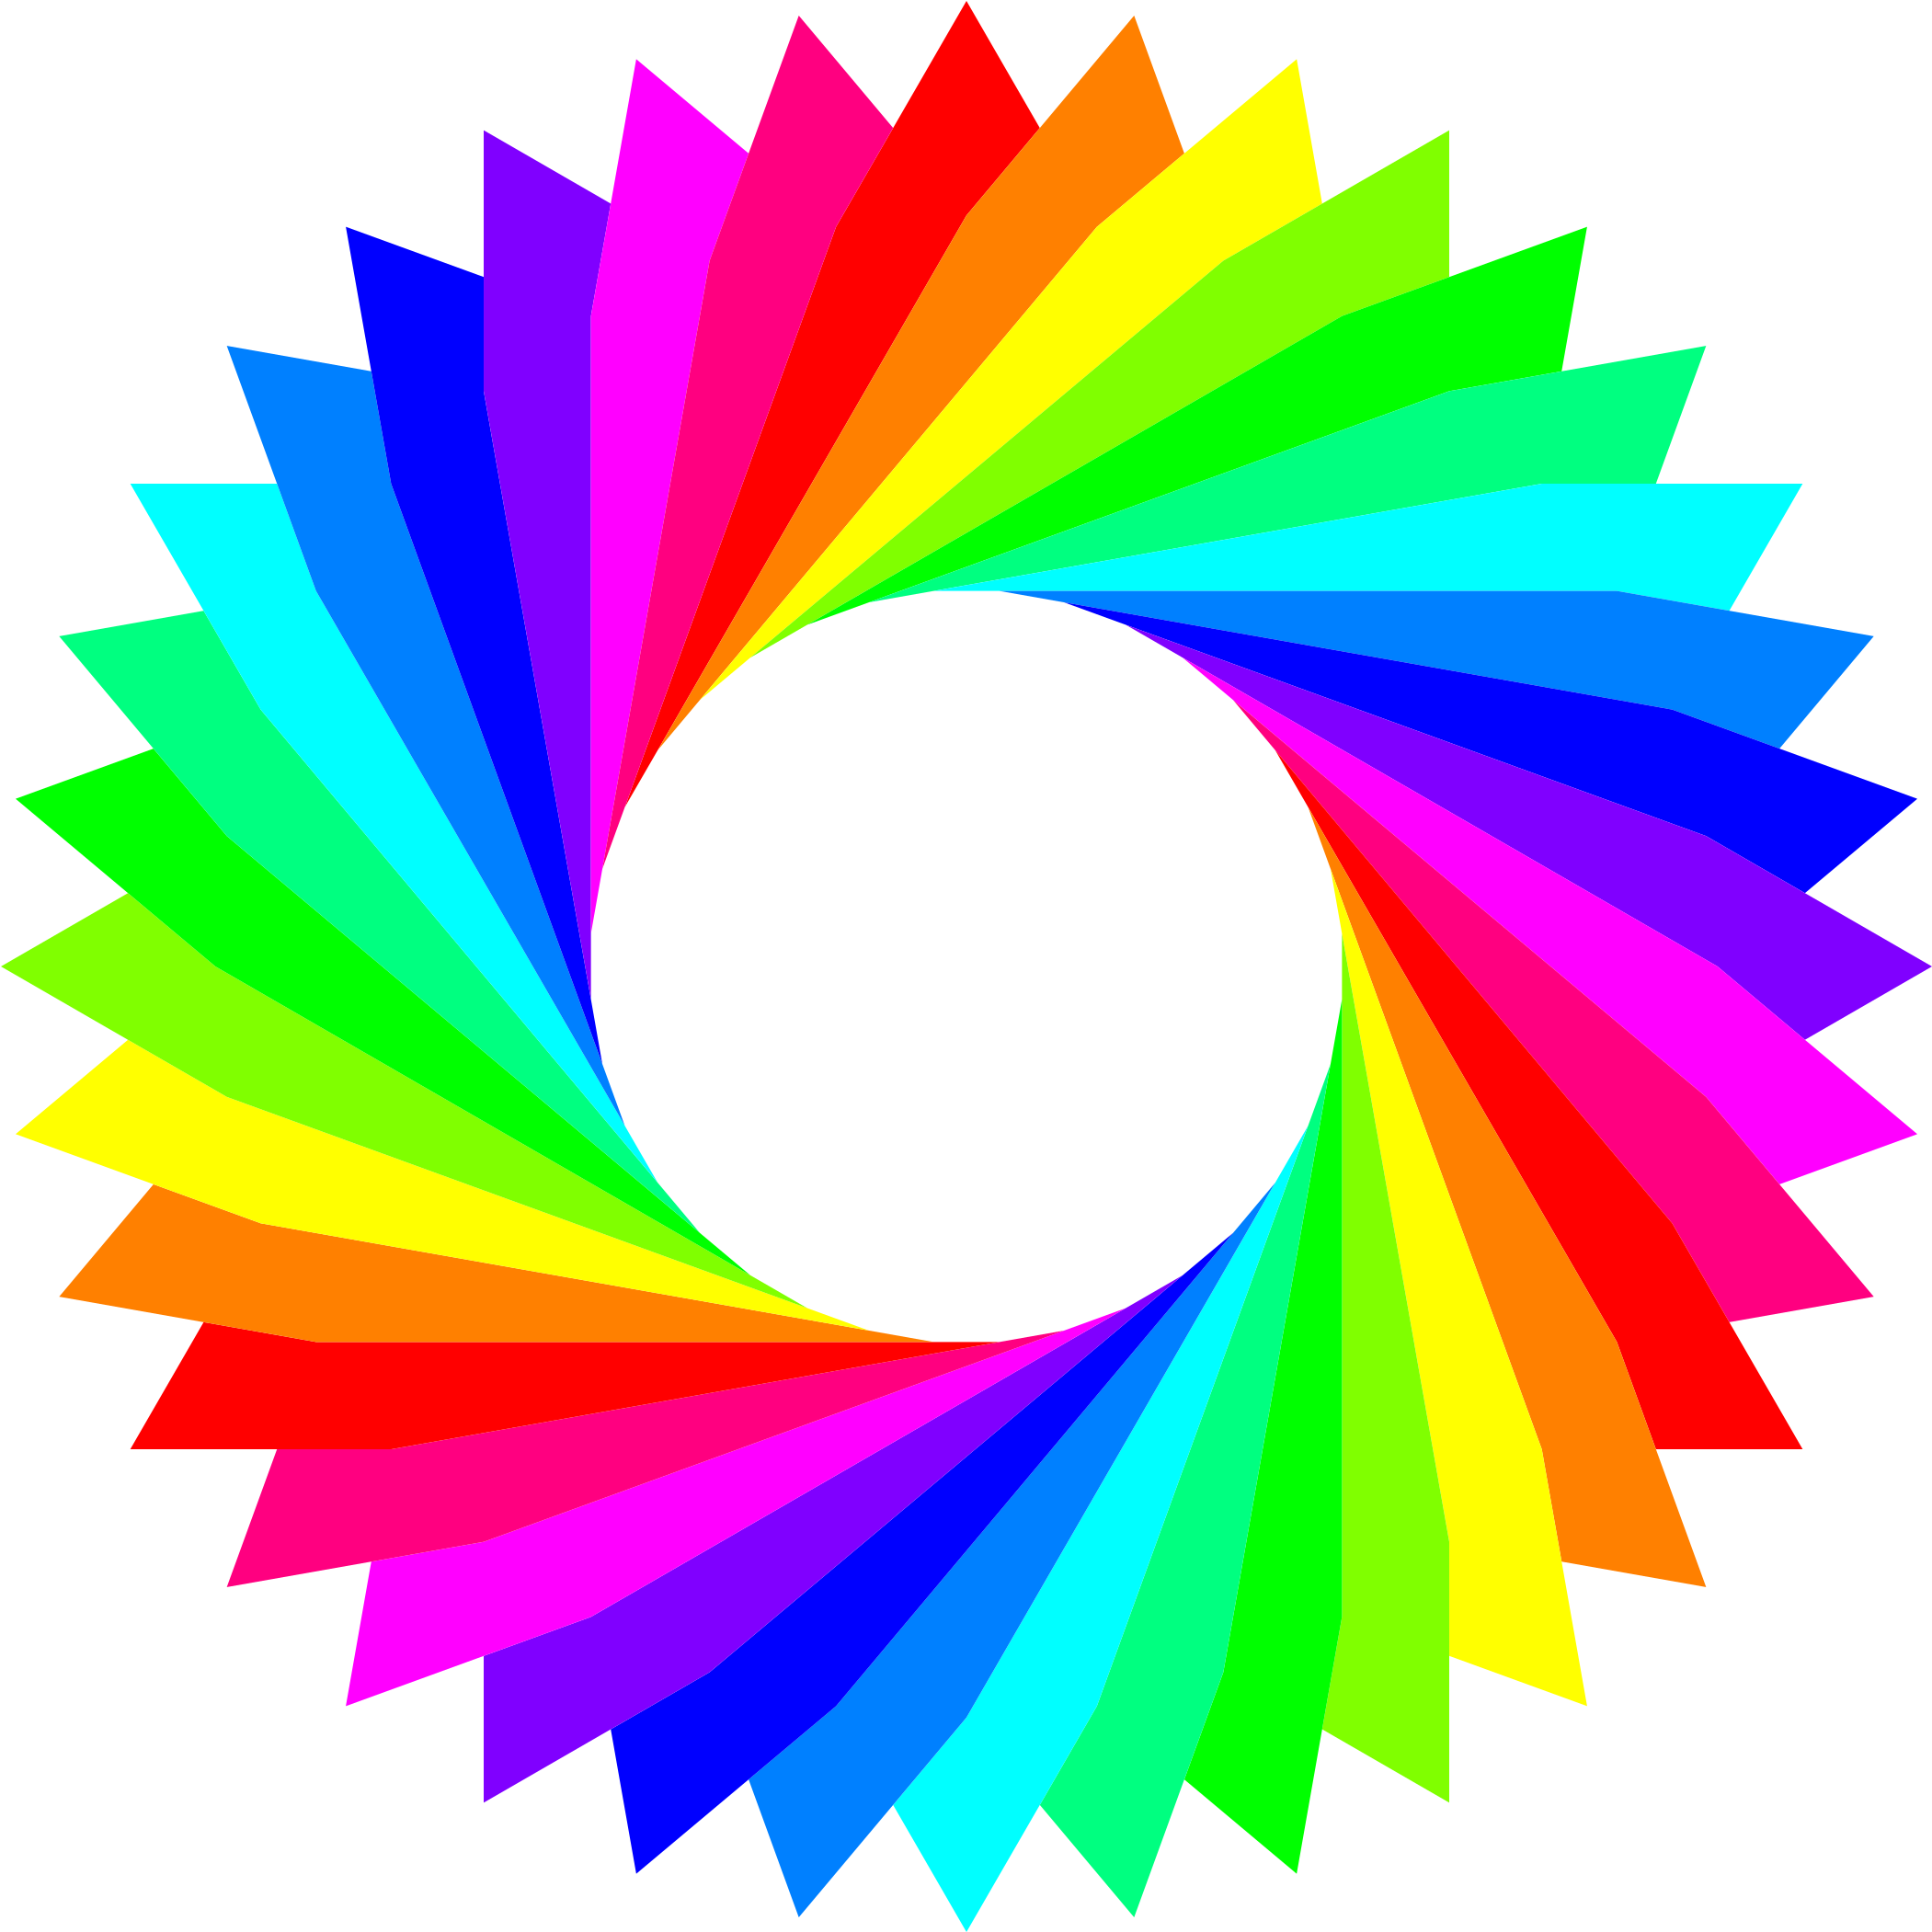 A Rainbow Colored Spiral With Black Background